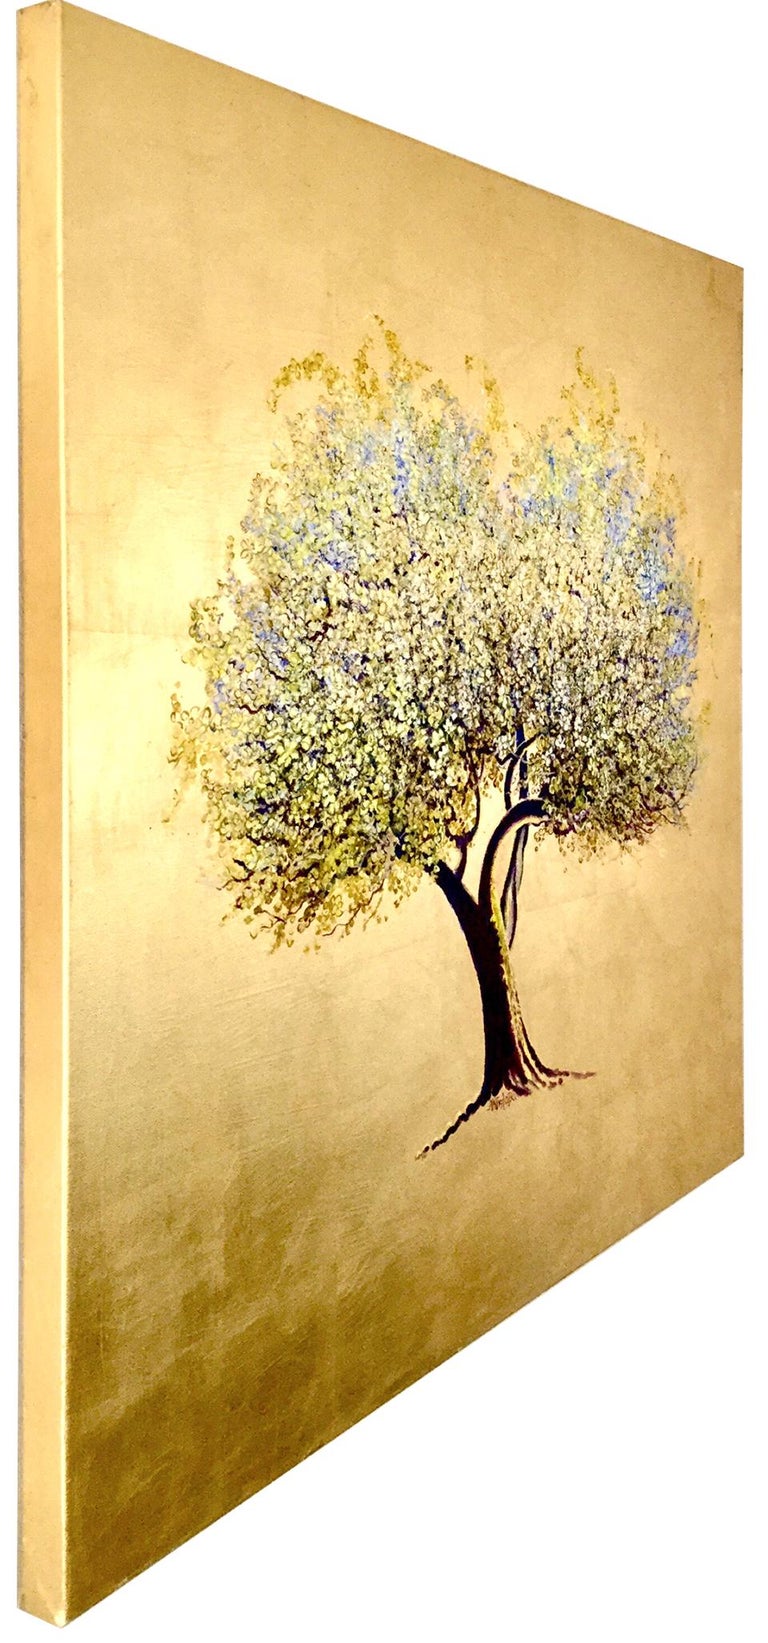 Rites of Spring, Oil on canvas with gold leaf, contemporary white flowering tree - Contemporary Painting by Anastasia Gklava